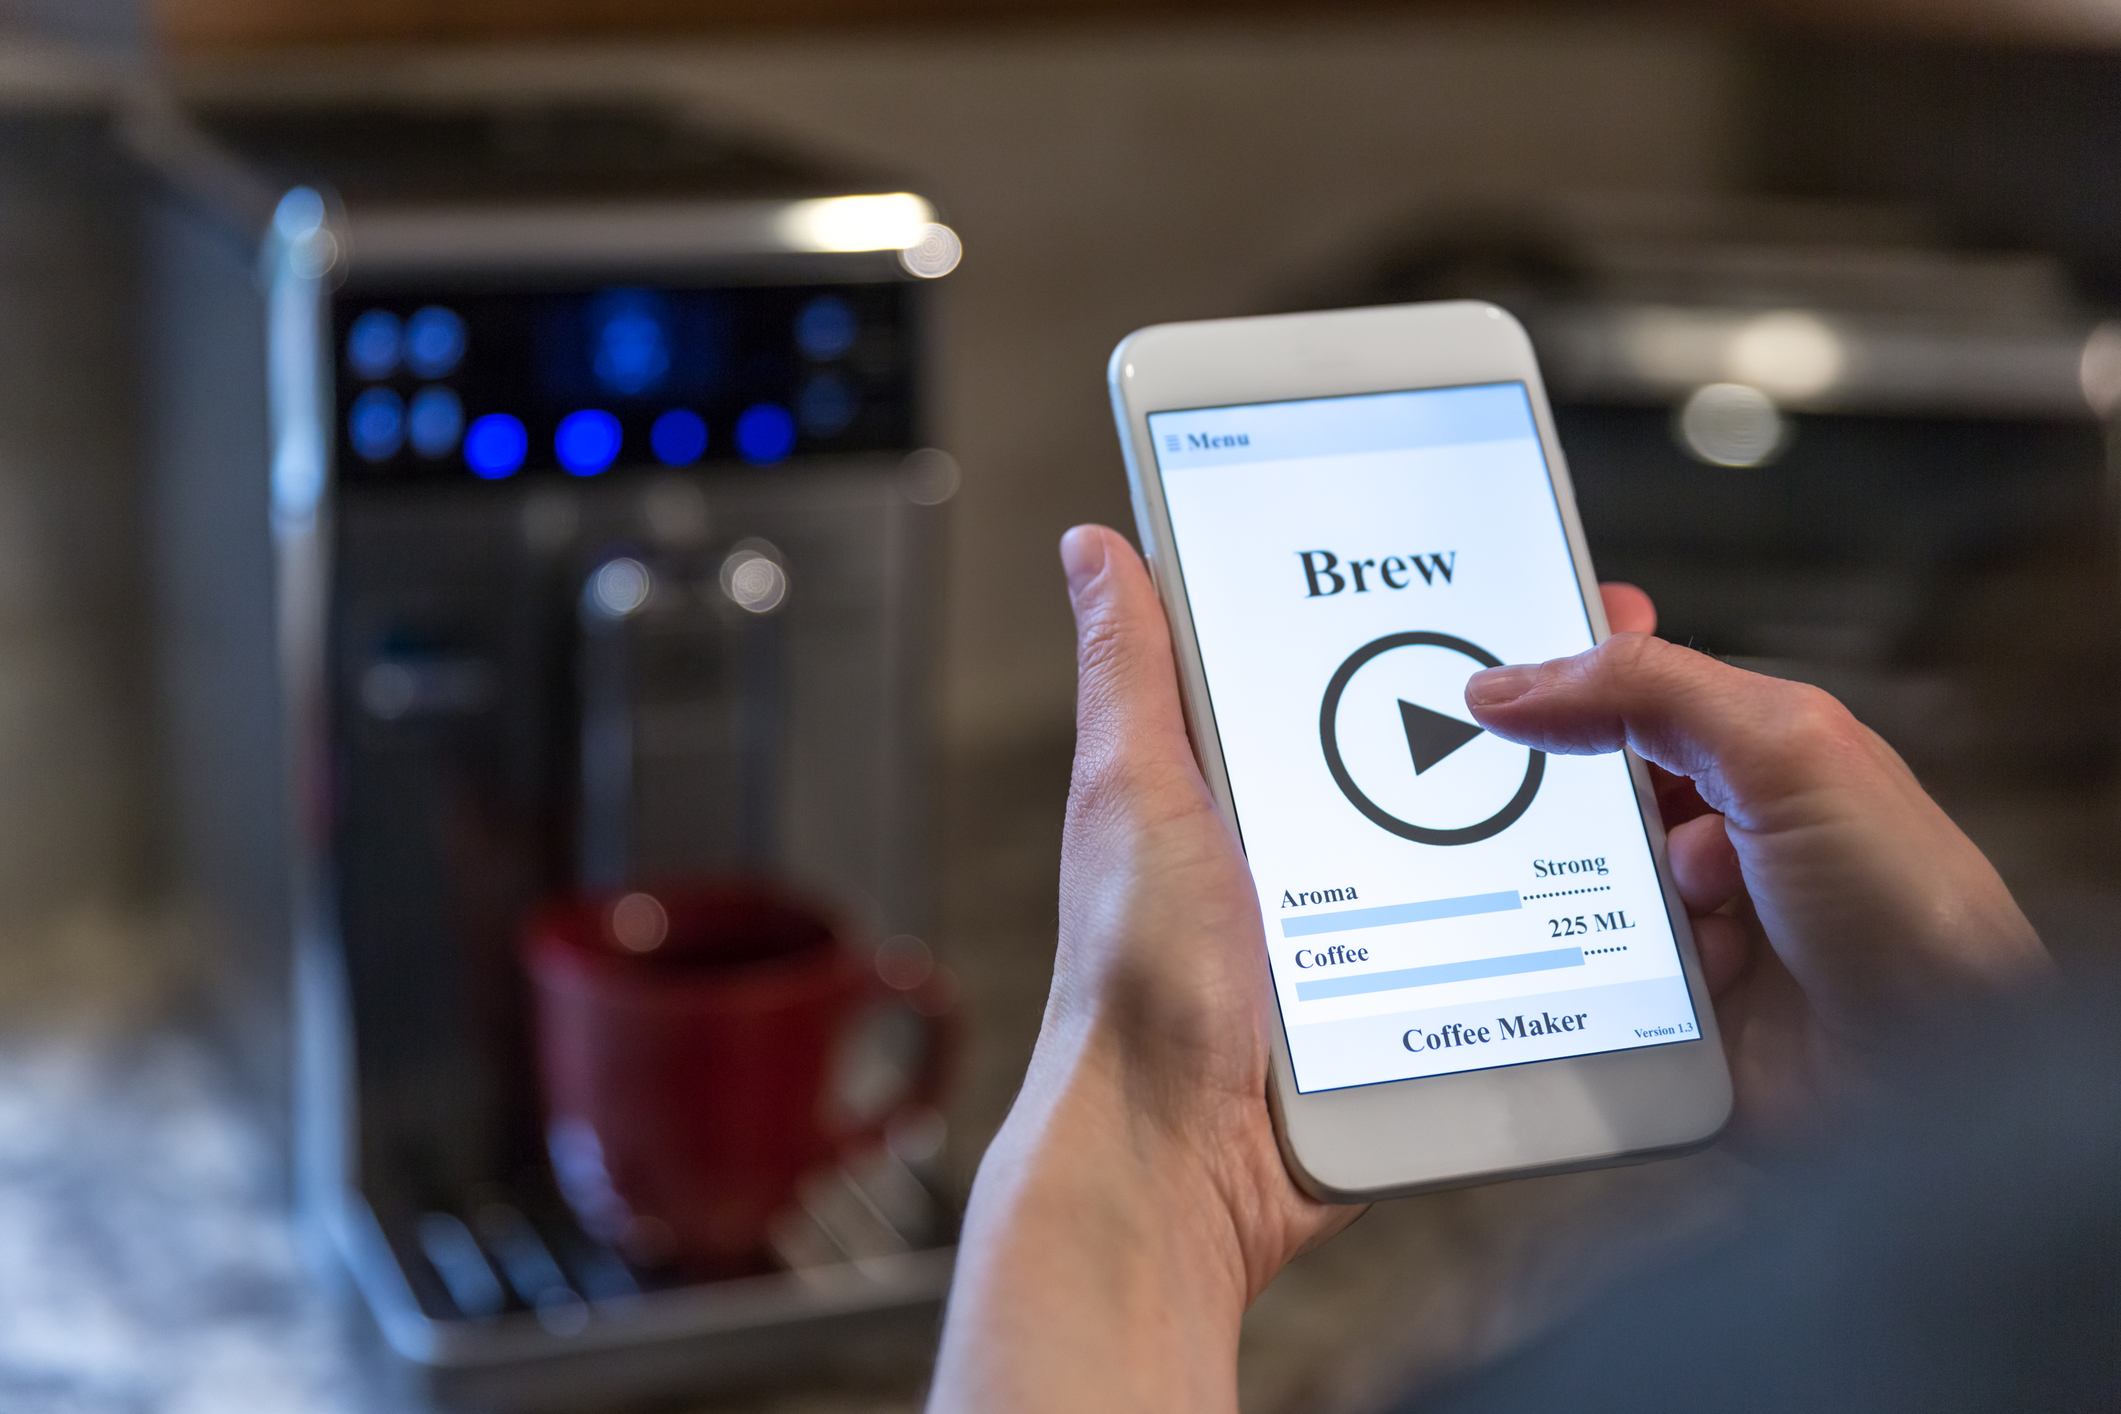 Smart Home app to brew coffee